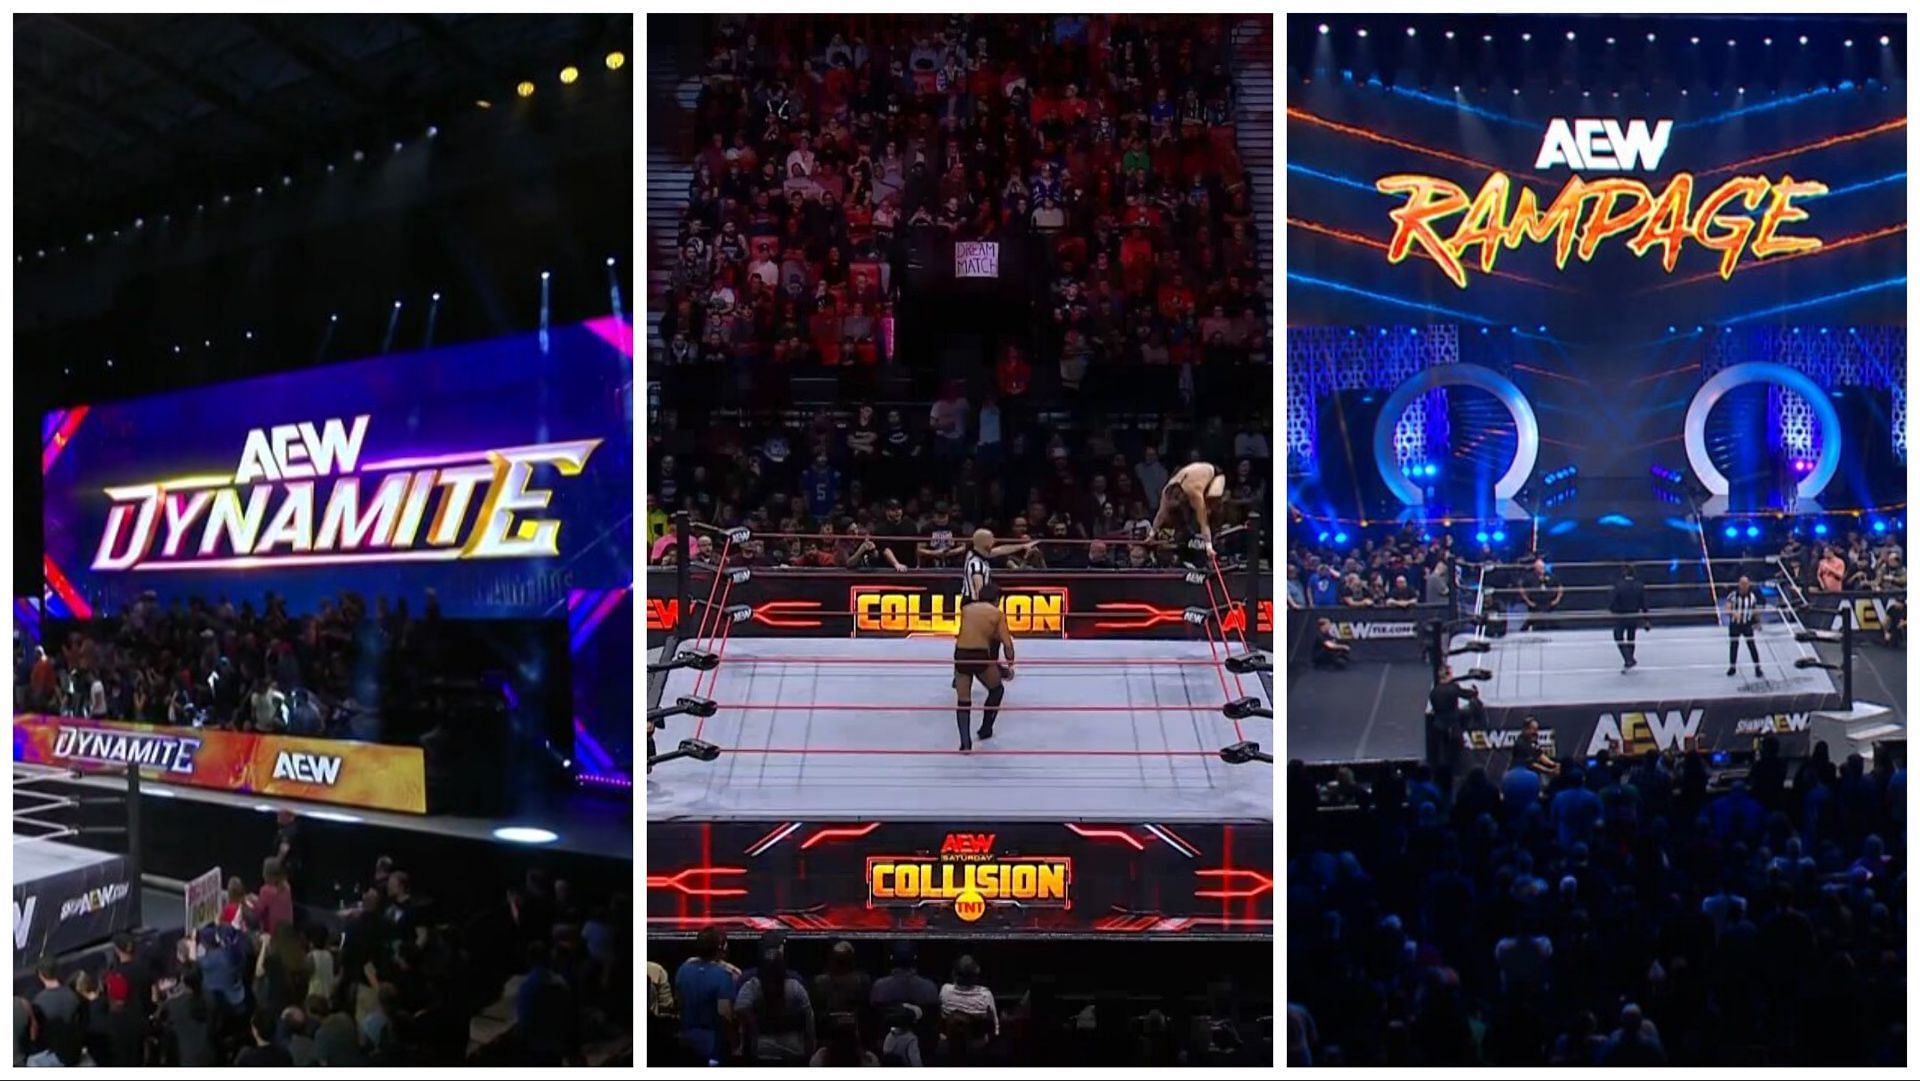 A look at the sets for AEW Dynamite, Rampage, and Collision